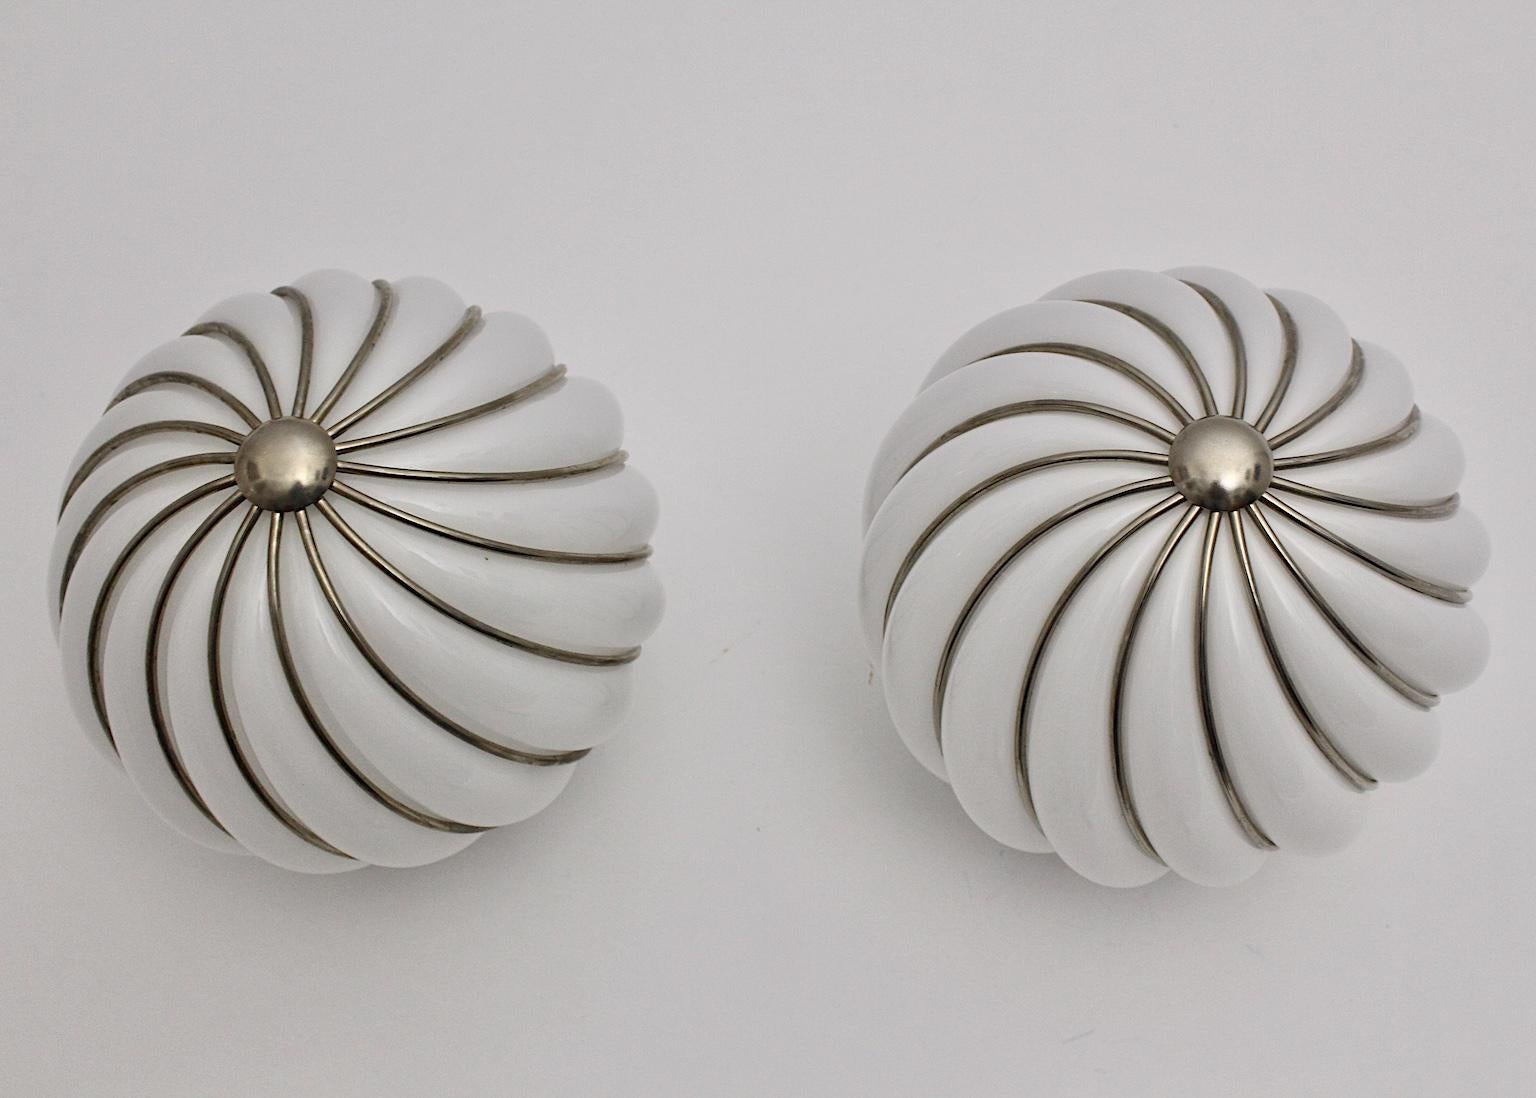 Mid-Century Modern pair of vintage flush mounts by Adolf Loos for Veart Murano, Italy 1960s.
An amazing white handmade glass ball with slightly curved nickel-plated lines, which shows a beautiful movement in its design. A round button sits in the